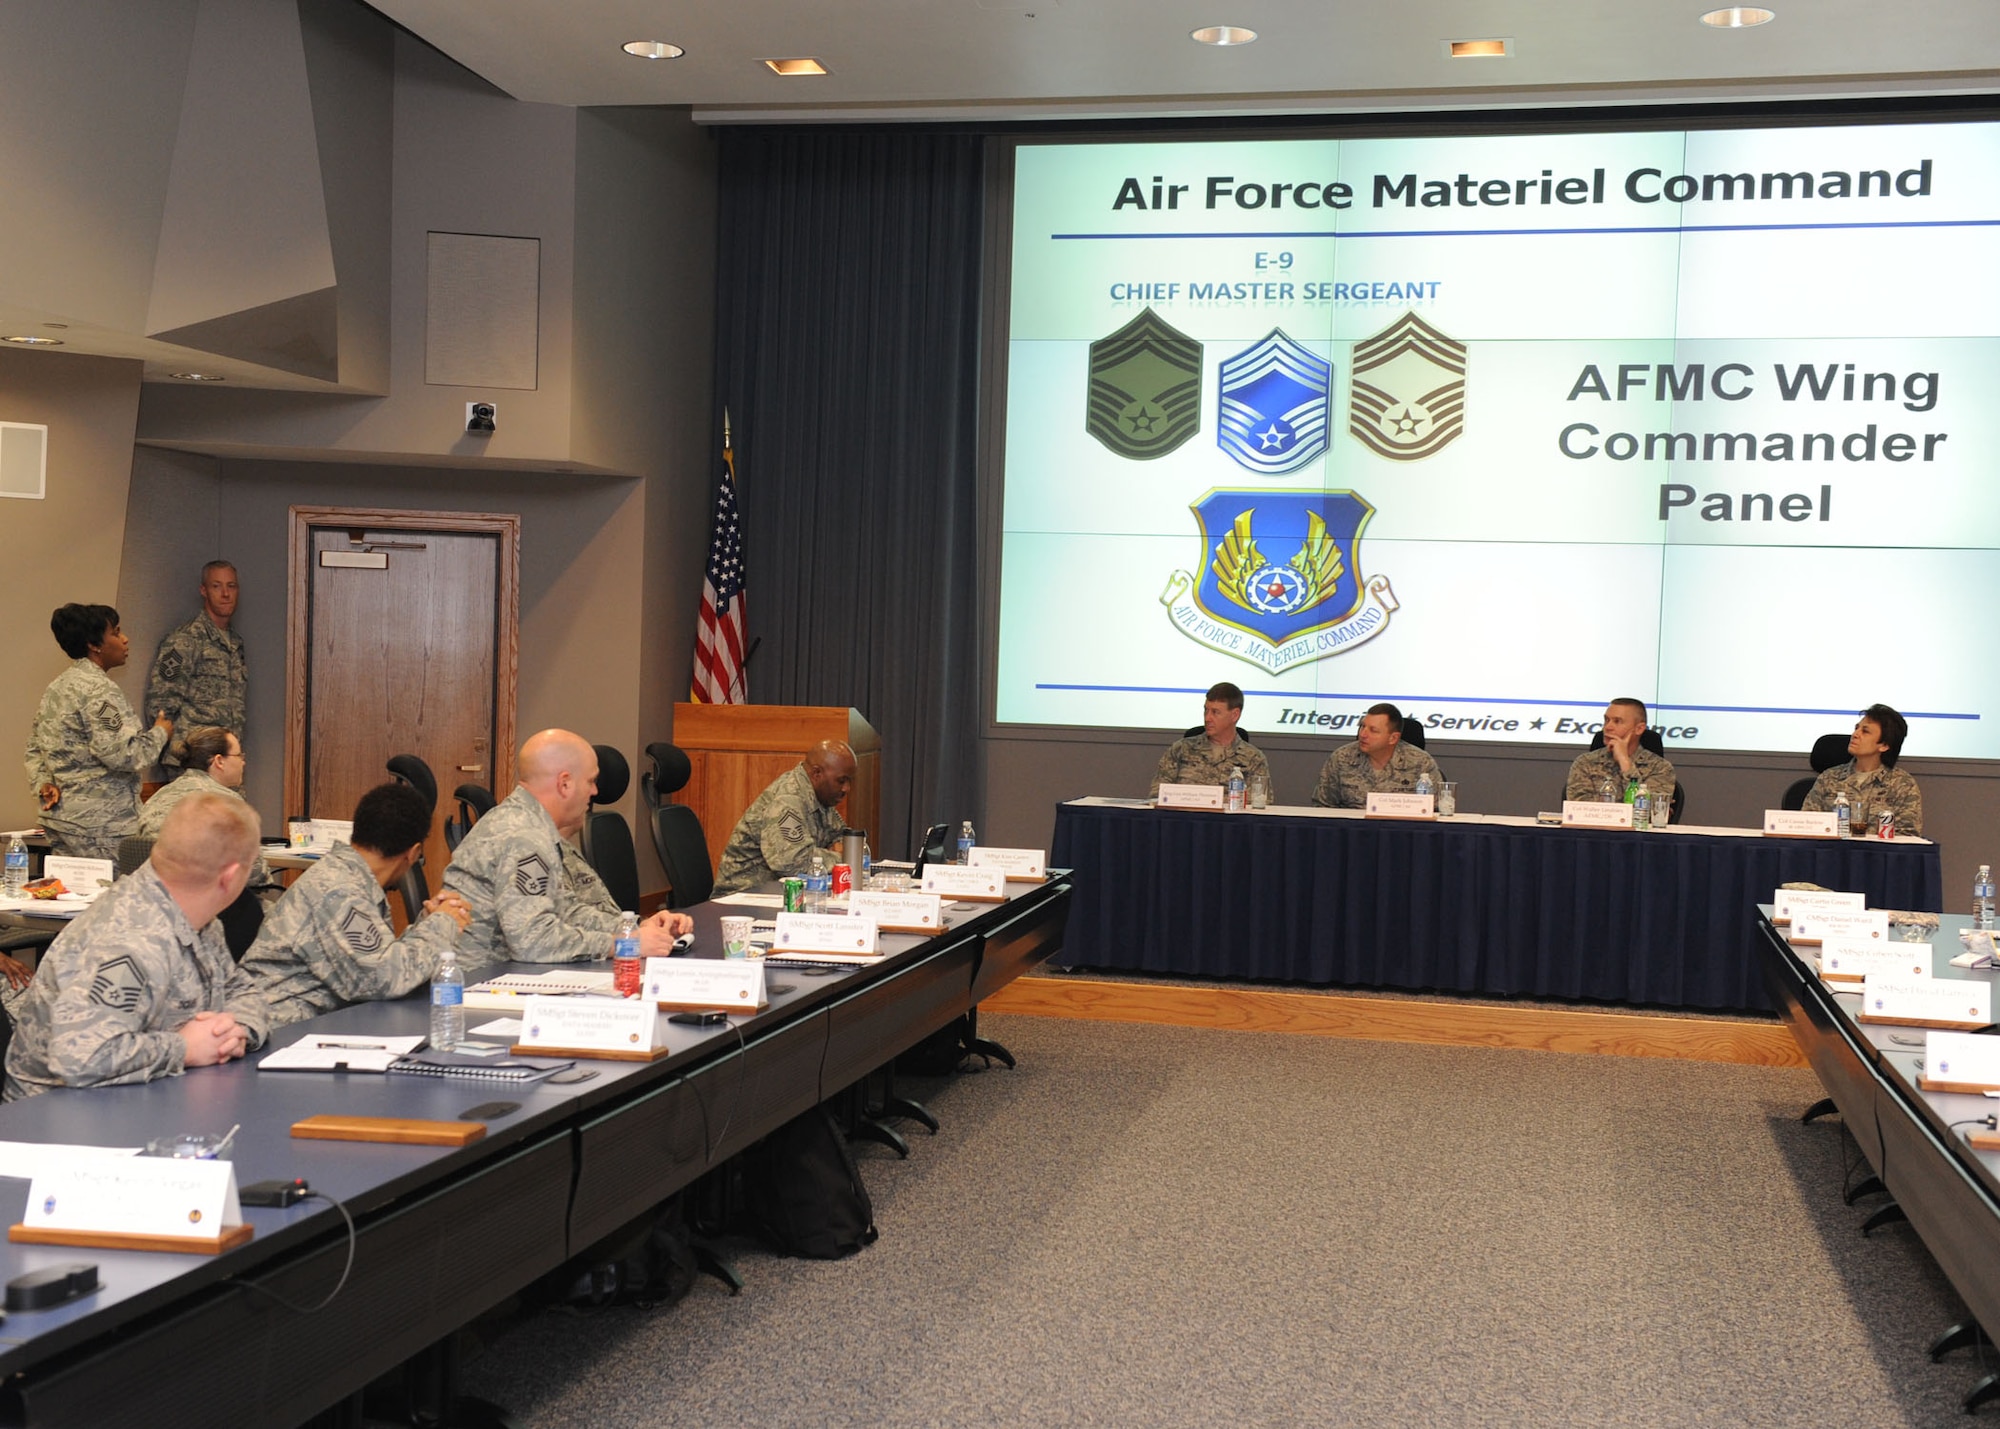 Brig. Gen. William Thornton, Air Force Materiel Command director of Air, Space and Information Operations; Col. Mark Johnson, AFMC deputy director of logistics; Col. Walter Lindsley, AFMC director of staff; and Col. Cassie Barlow, 88th Air Base Wing commander, answer questions at the Wing Commander Panel during the 2013 AFMC Chiefs' Orientation. (U.S. Air Force photo/Staff Sgt. Christopher Carwile)